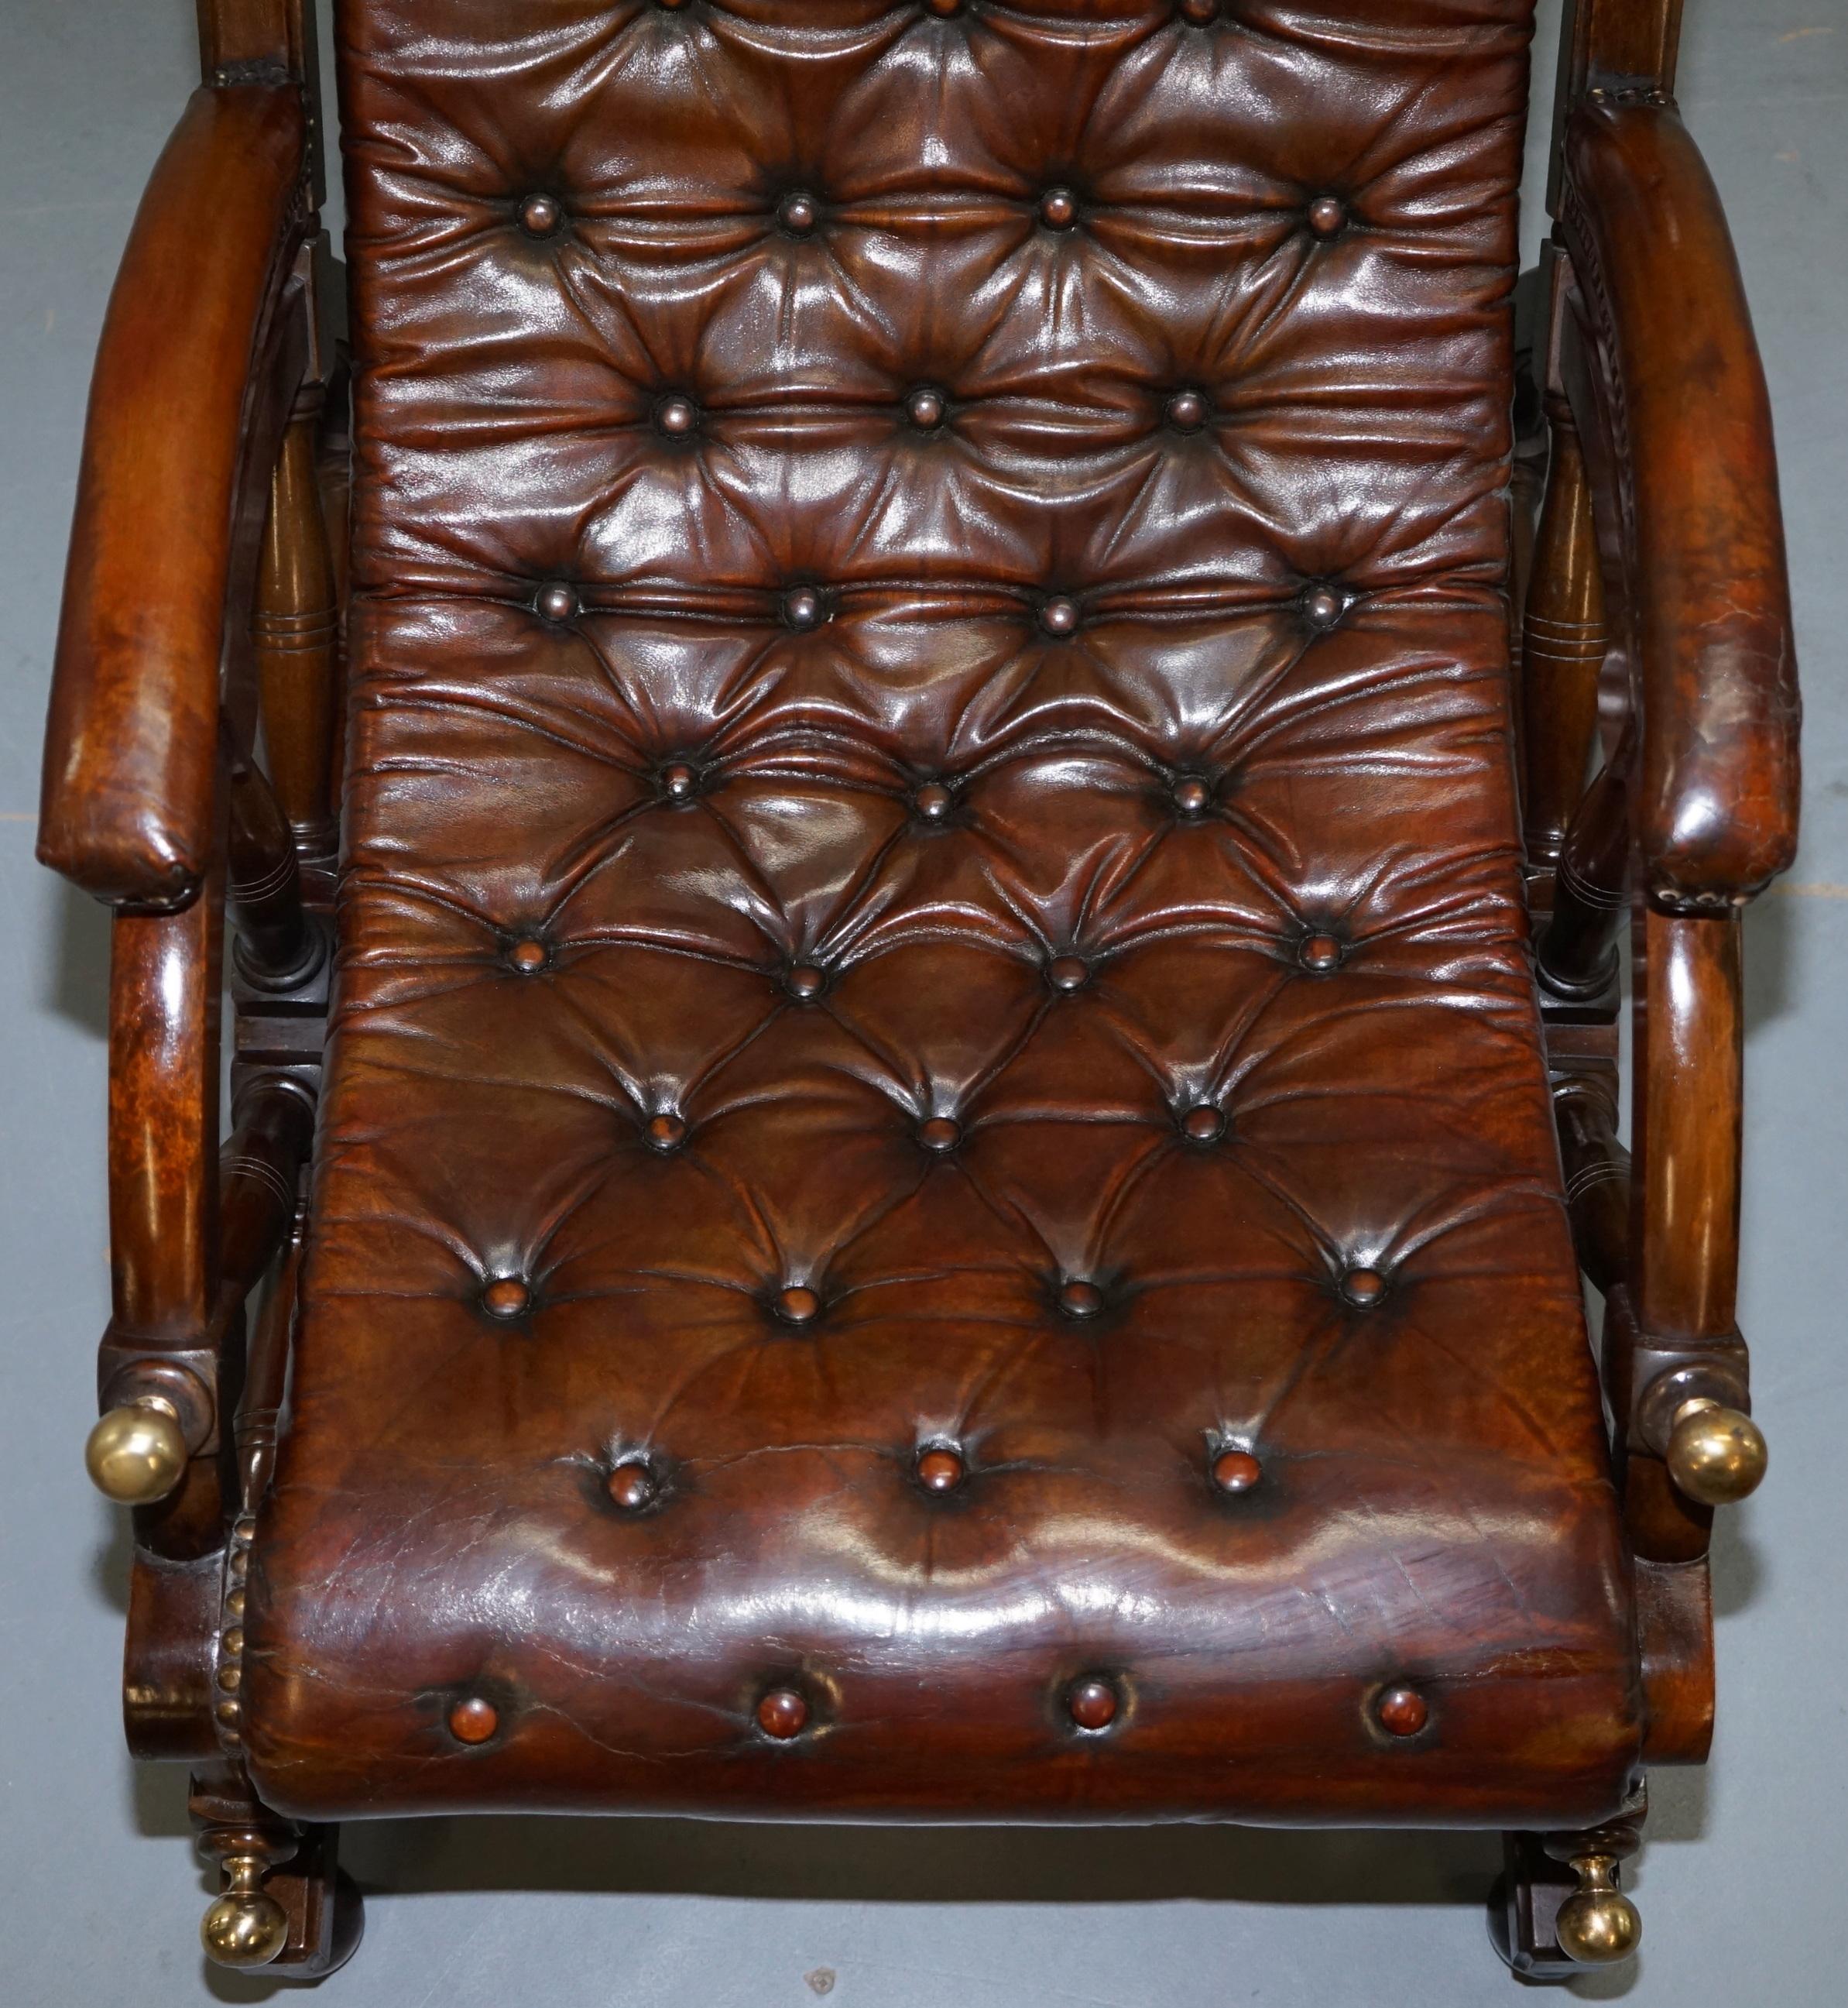 Stamped the Clermont Baltimore 1801 Chesterfield Buttoned Brown Leather Armchair 1